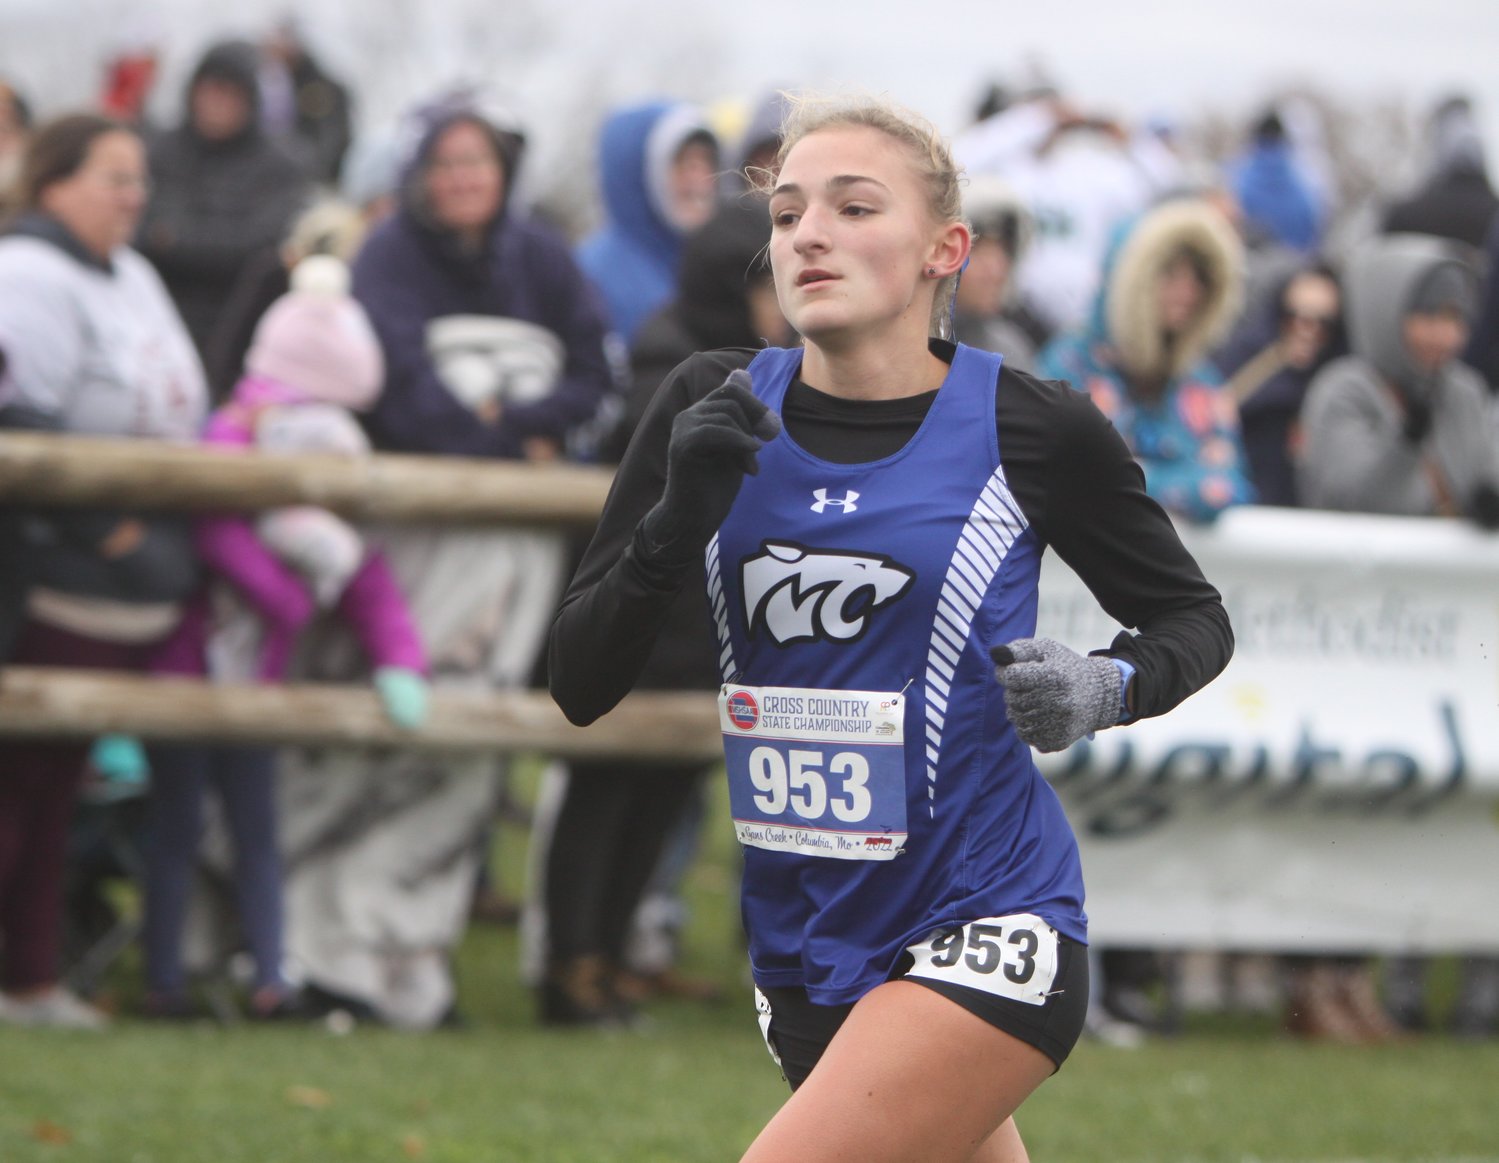 Montgomery County senior Lyric Ford approaches the finish line at the Class 3 girls state cross country meet on Nov. 5 at Gans Creek Course in Columbia. She finished fourth with a 19:06, earning her fourth all-state medal.